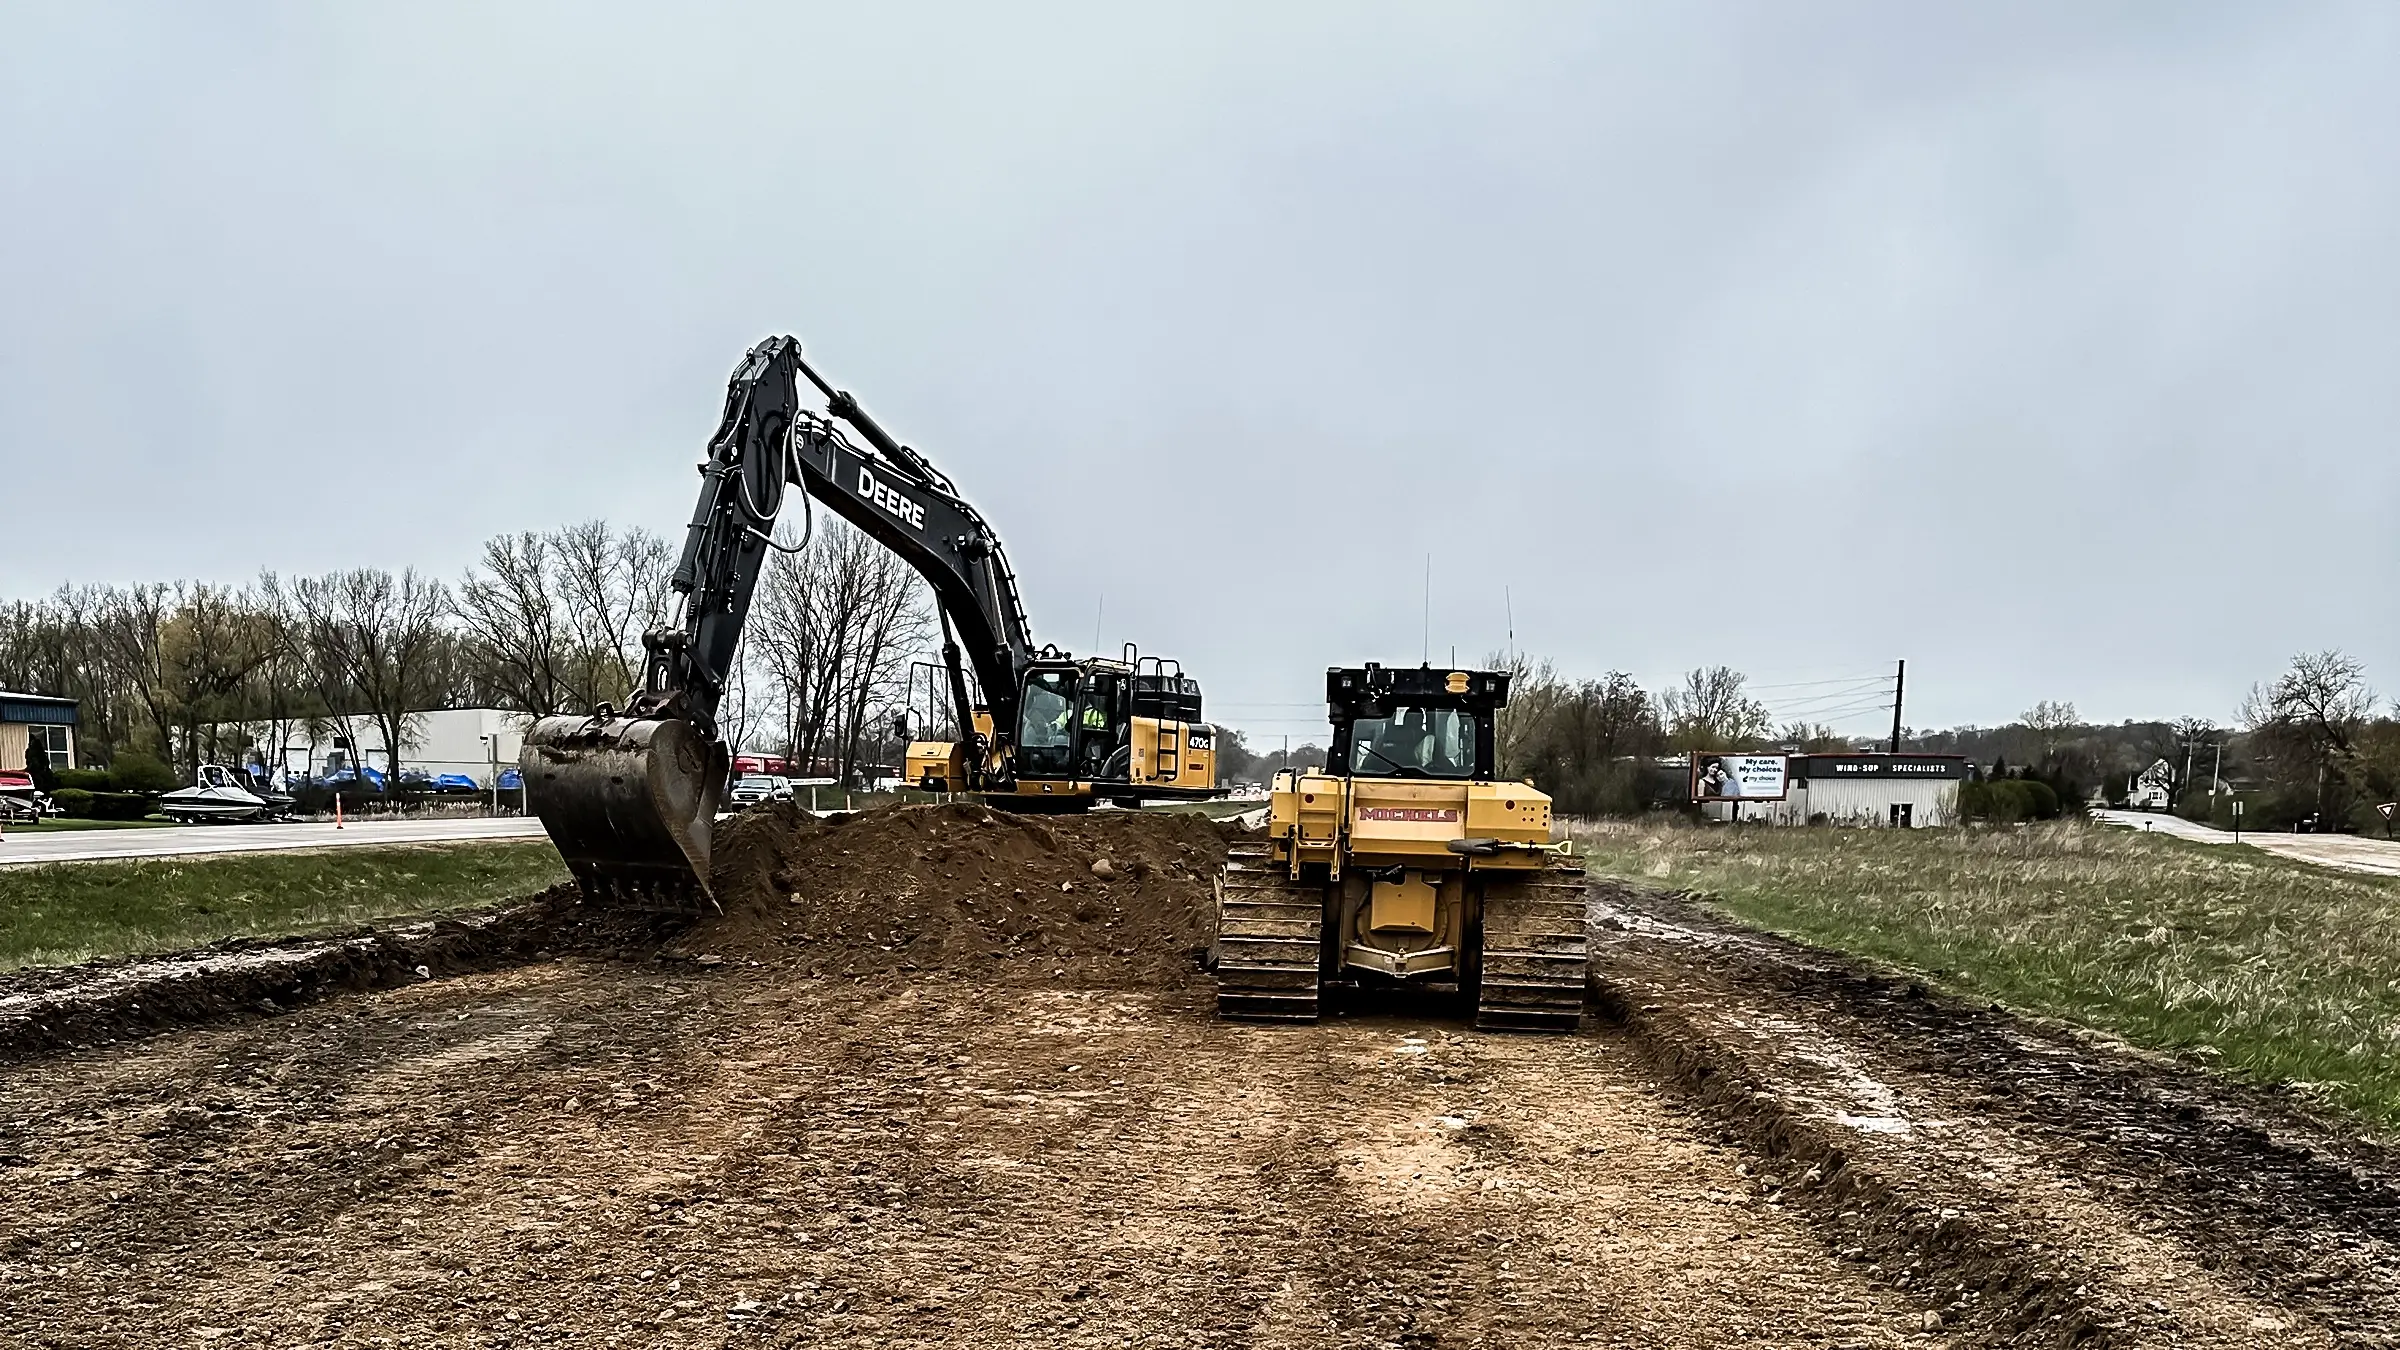 A bulldozer and backhoe layout an excavated road.